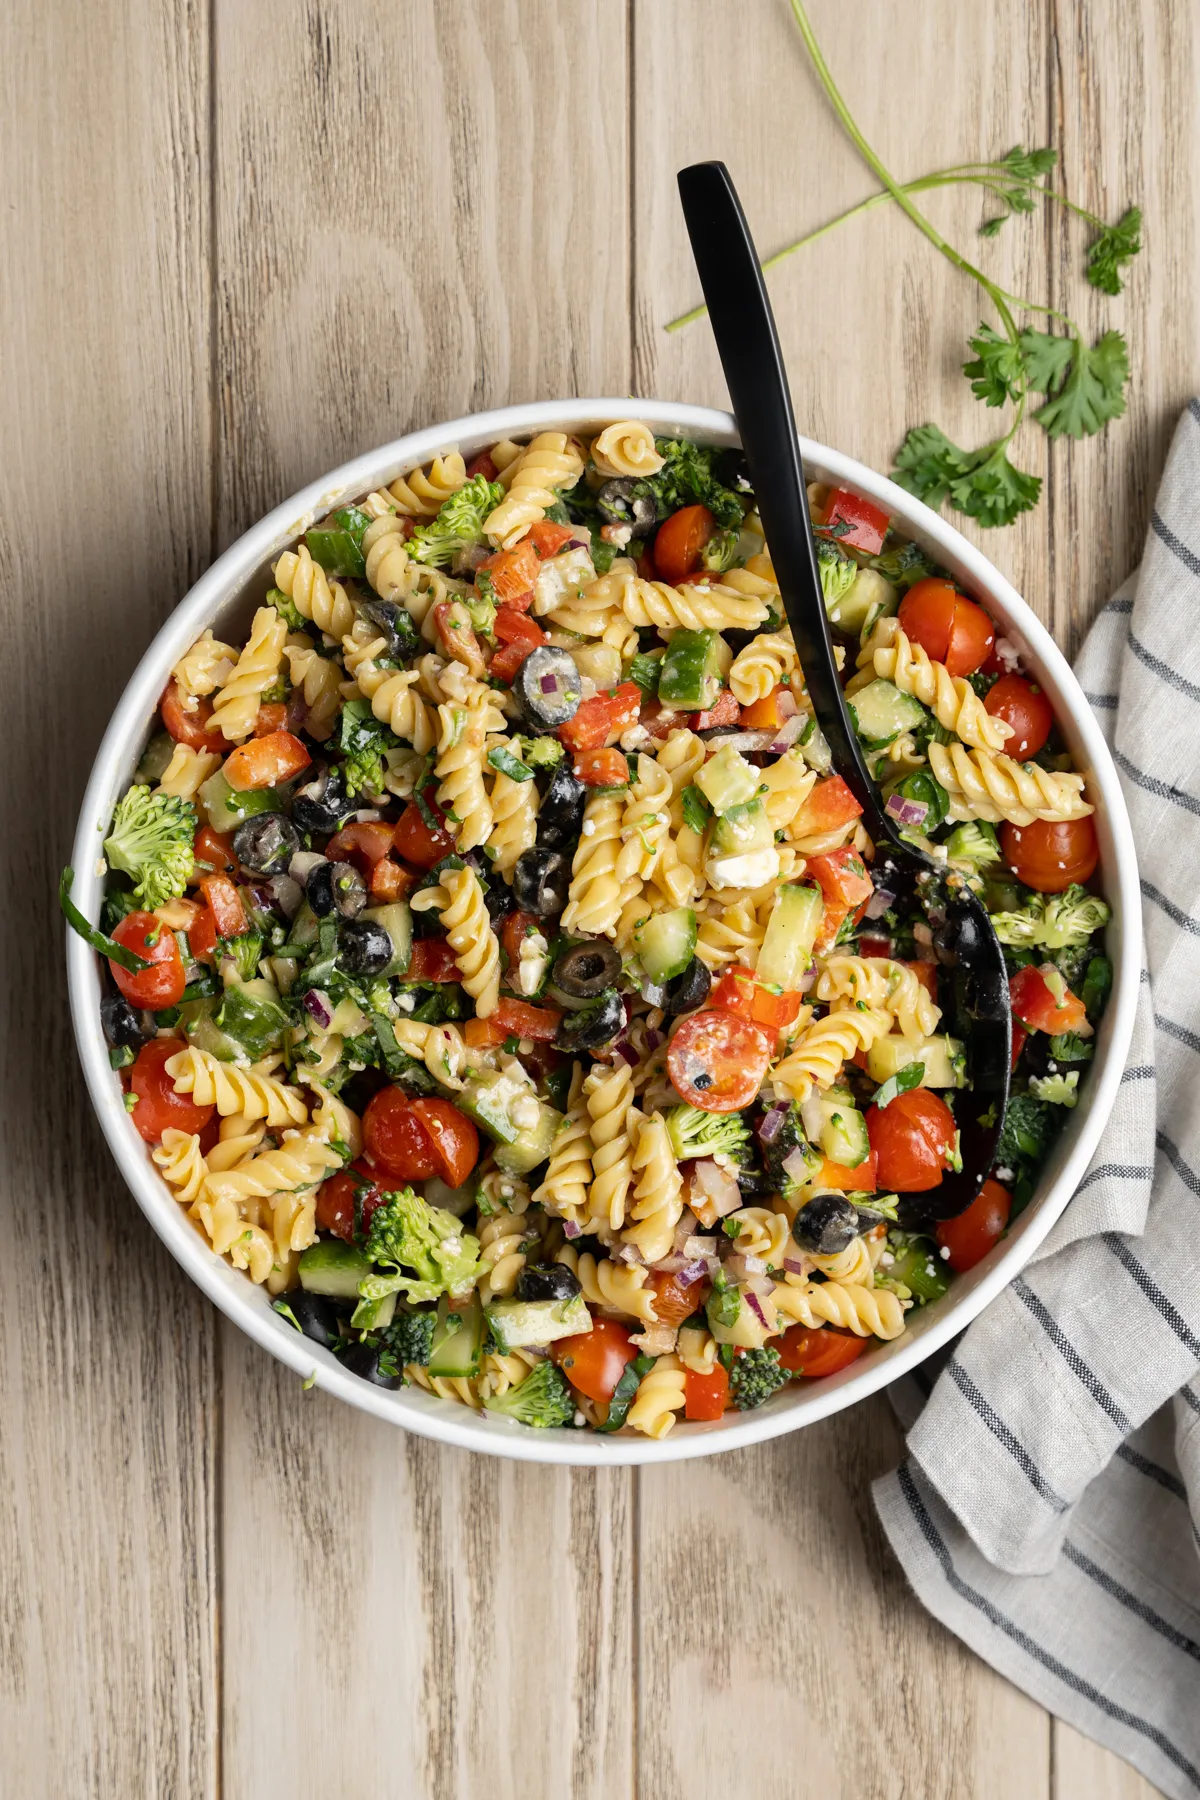 Spoon in a bowl of high-protein pasta salad.